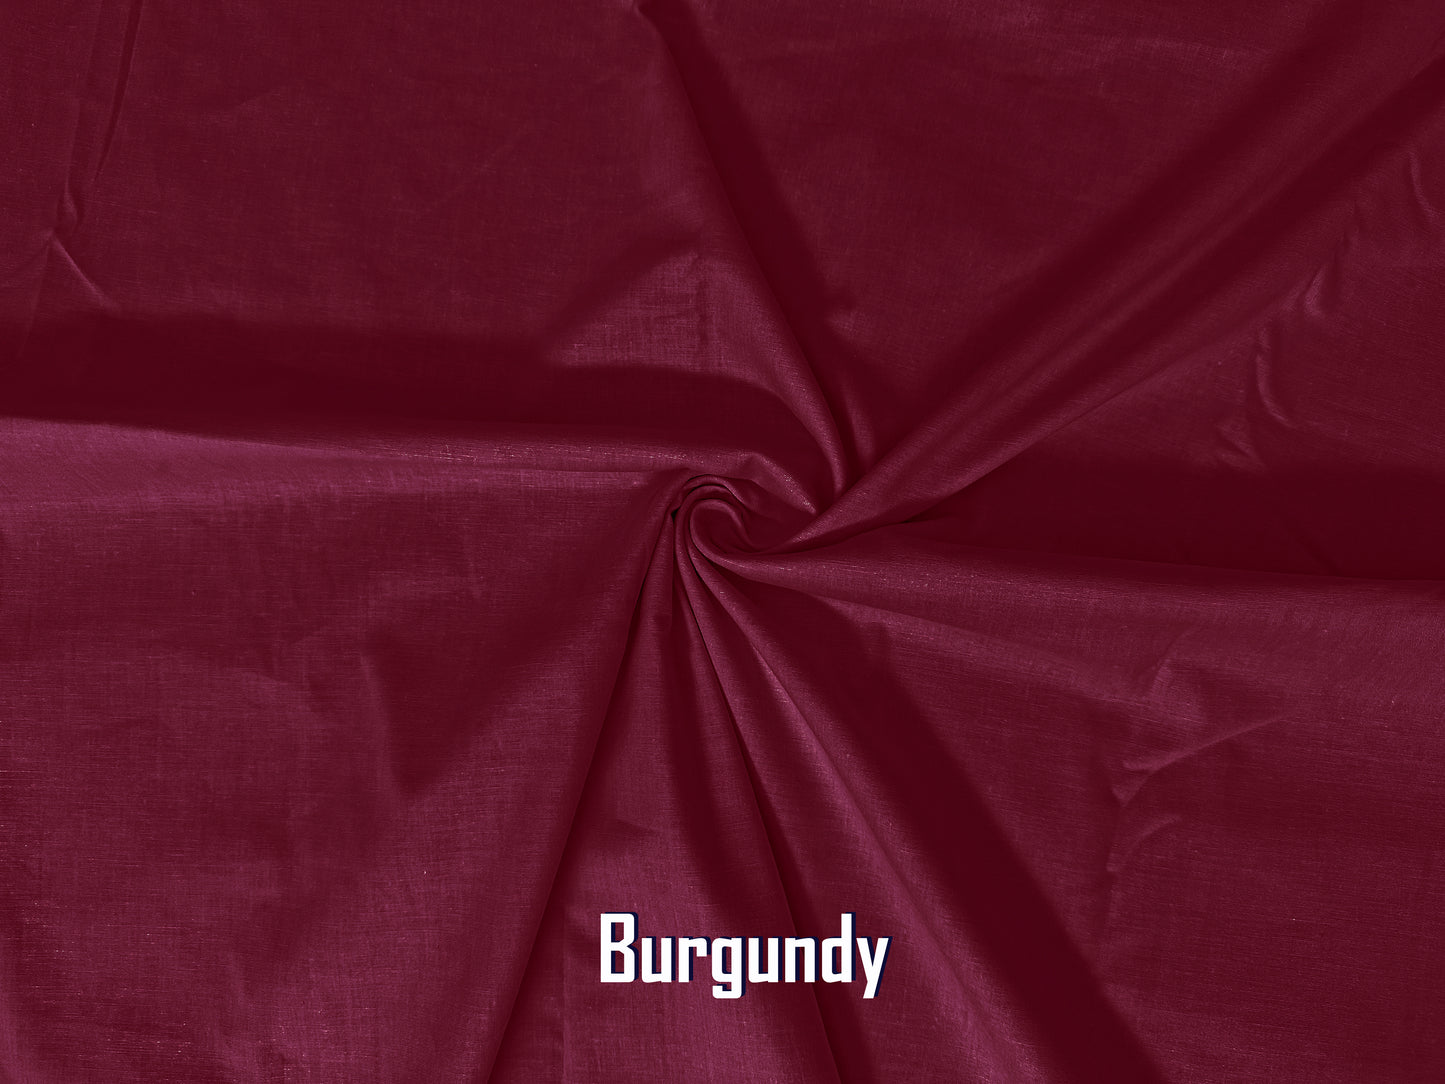 Woven Cotton Poplin Fabric-Burgundy Solid Color-WnCP009-Sold by the Bulk